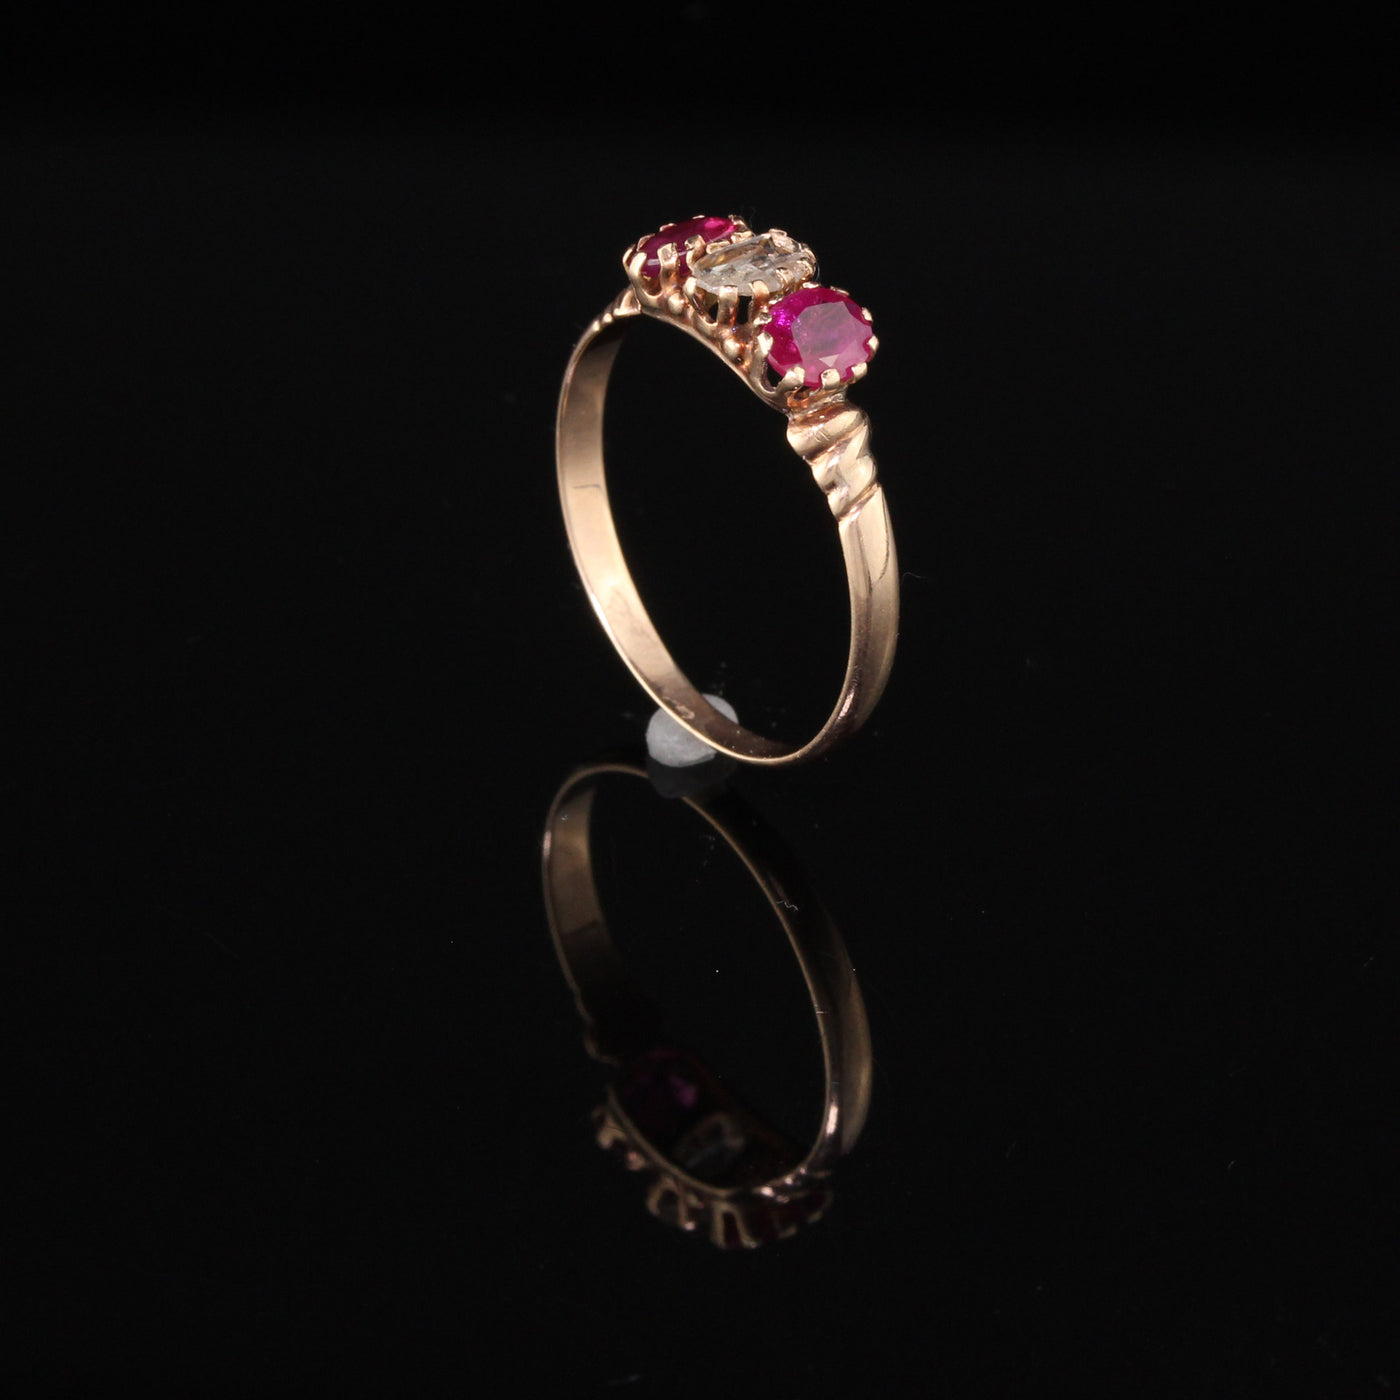 Antique Victorian 10K Rose Gold Rose Cut Diamond & Ruby 3-Stone Engagement Ring